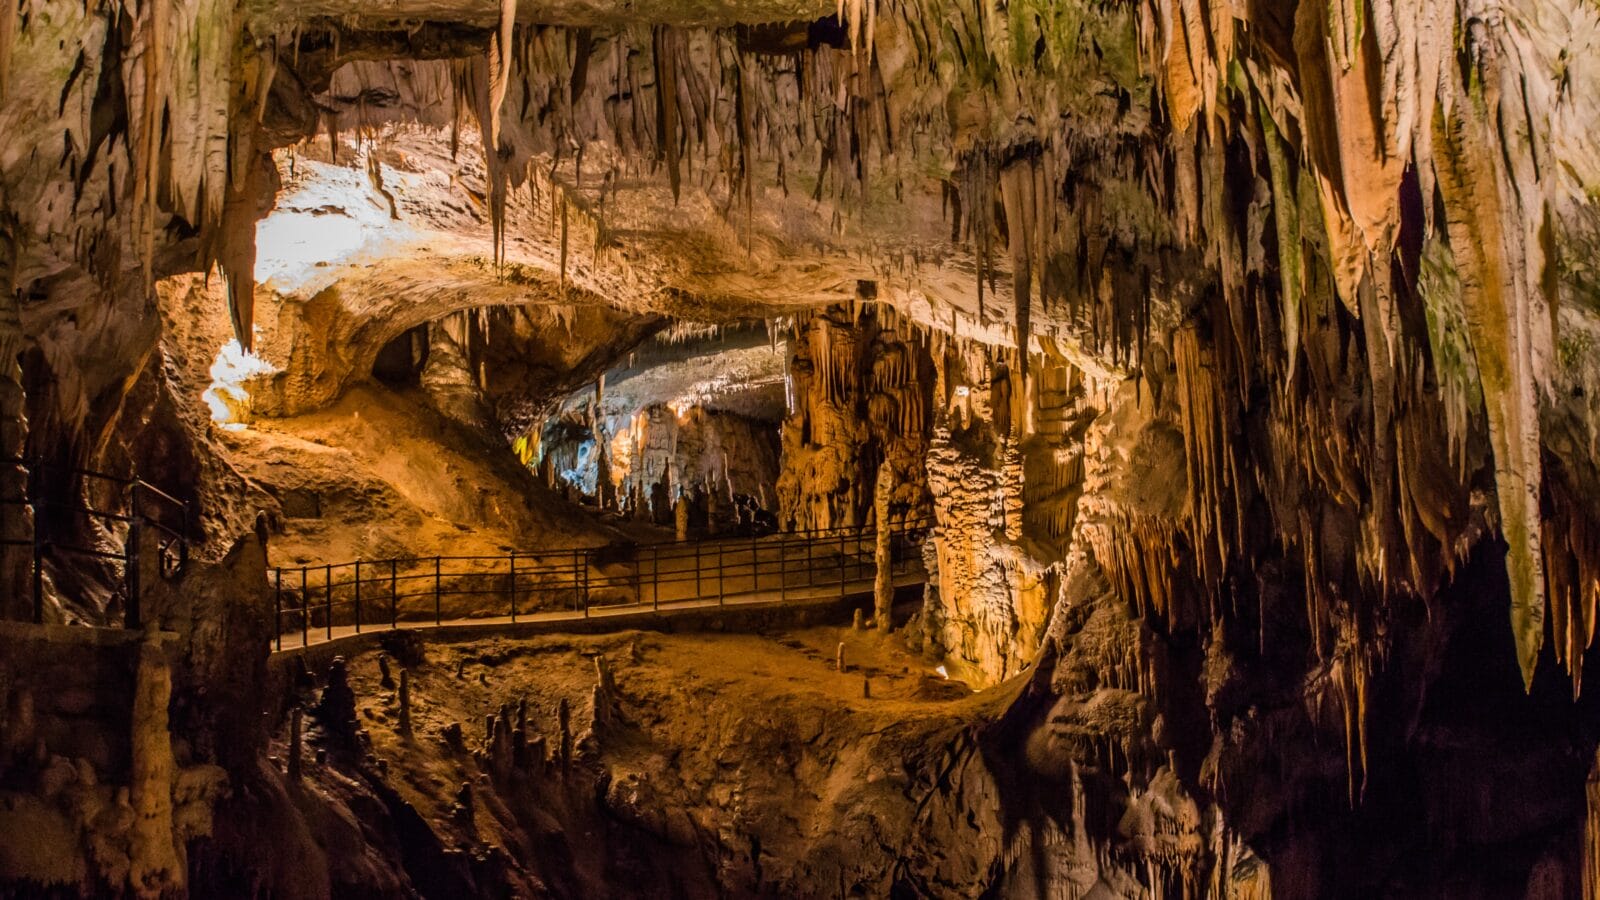 <p>Another awe-inspiring natural gem in central Europe is the Postojna Cave in the Mediterranean country of Slovenia. The cave system stretches 15 miles underground, with four caves connected by the same river.</p><p>Along with the Škocjan Caves, this mainstream destination remains one of the top-visited places in the country. Are you ready for its expansive subterranean halls, giant stalactites, and protruding age-old stalagmites? Don’t forget to say ‘hi’ to the baby dragons residing in the cave while you’re there!</p>